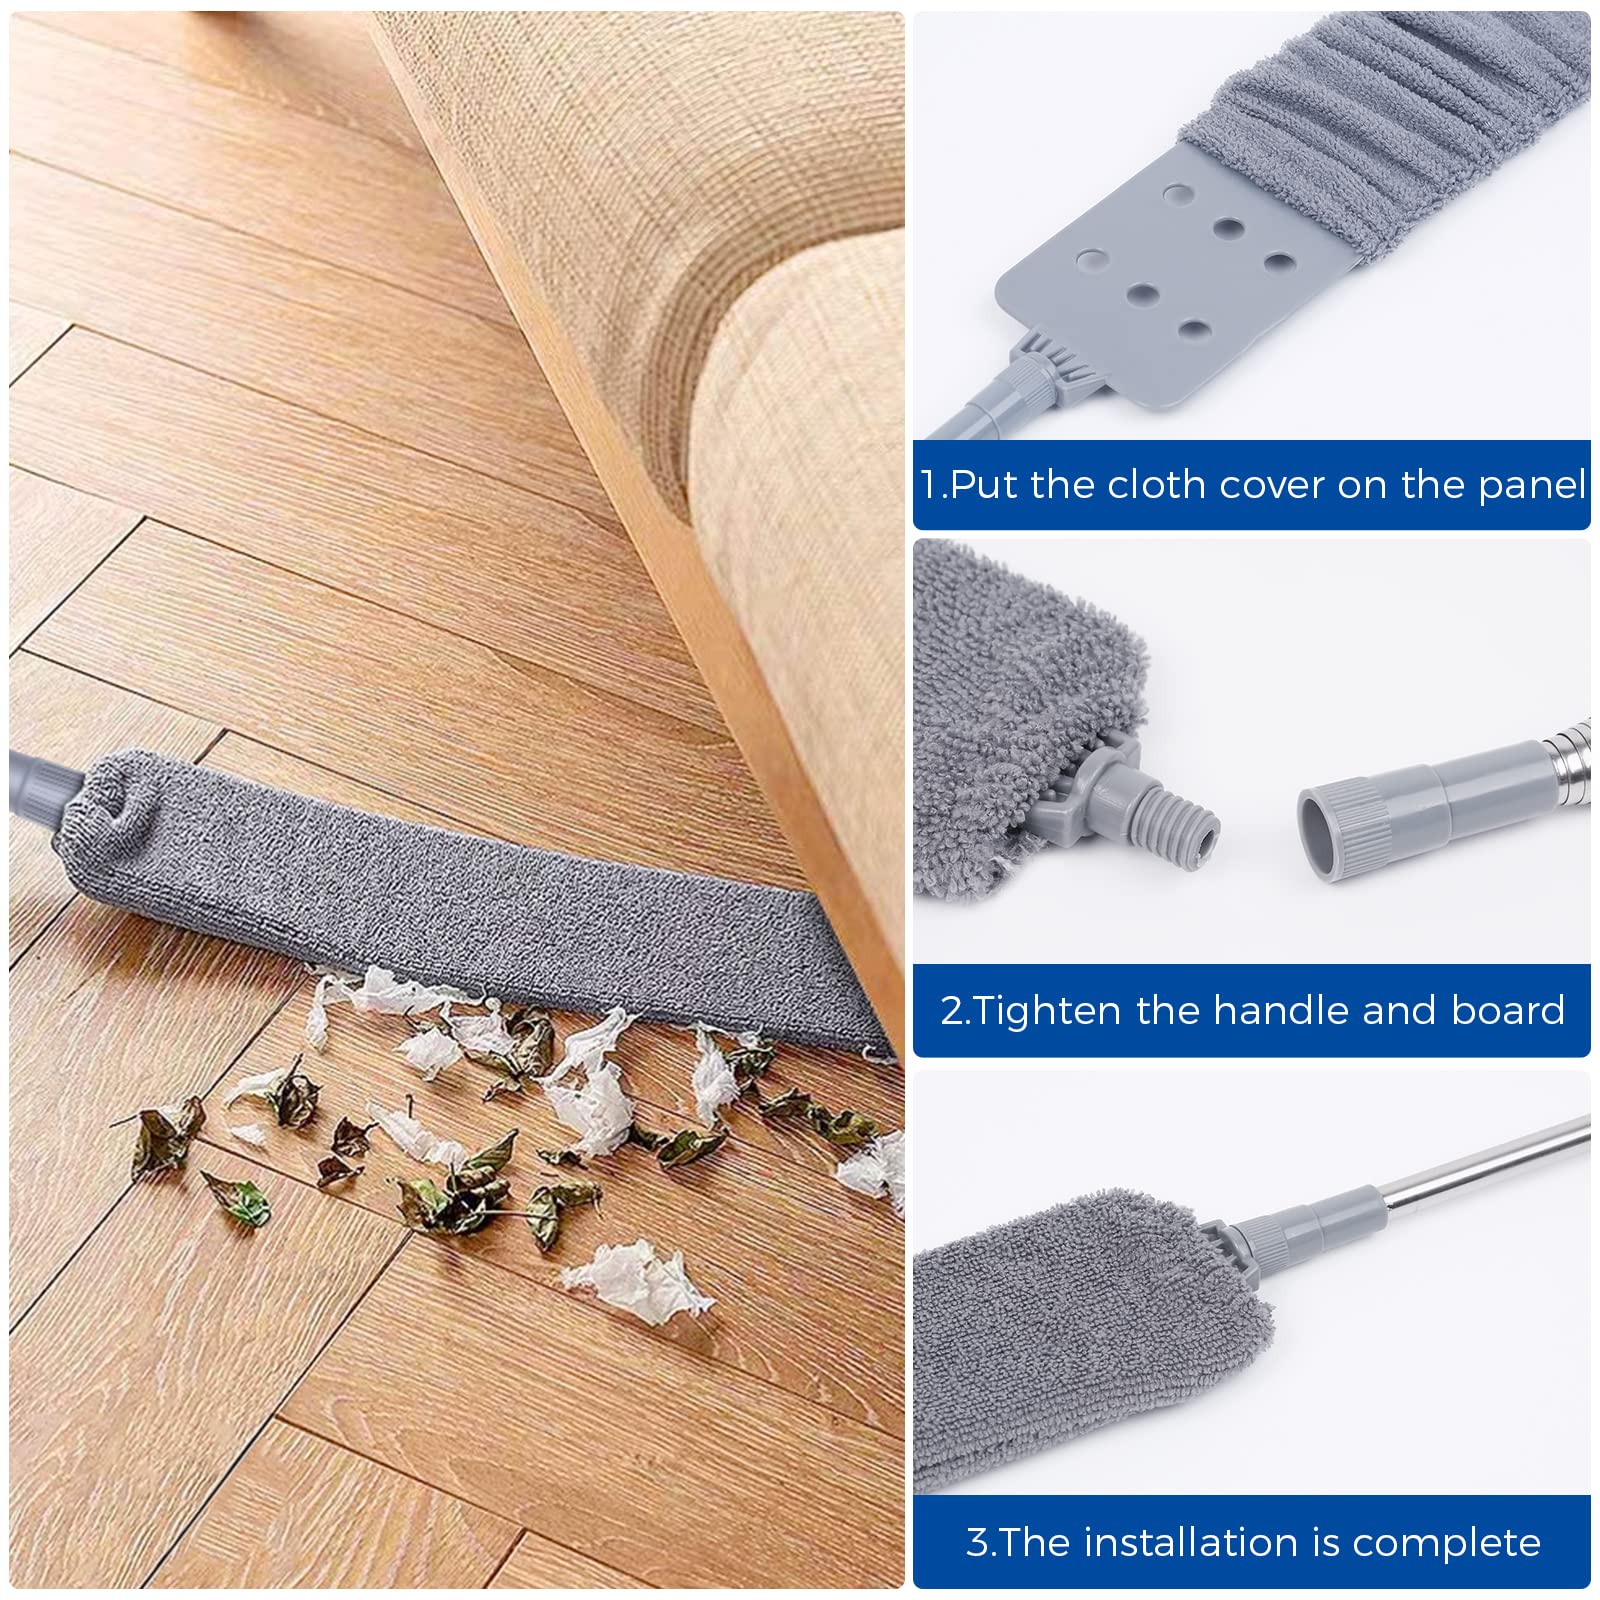 Retractable Gap Dust Cleaner Cleaning Tools with 2 Microfiber Dusting Cloths Long Handle 60inches Washable and Retractable Duster Brush for Cleaning Under Appliances Furniture Couch Fridge